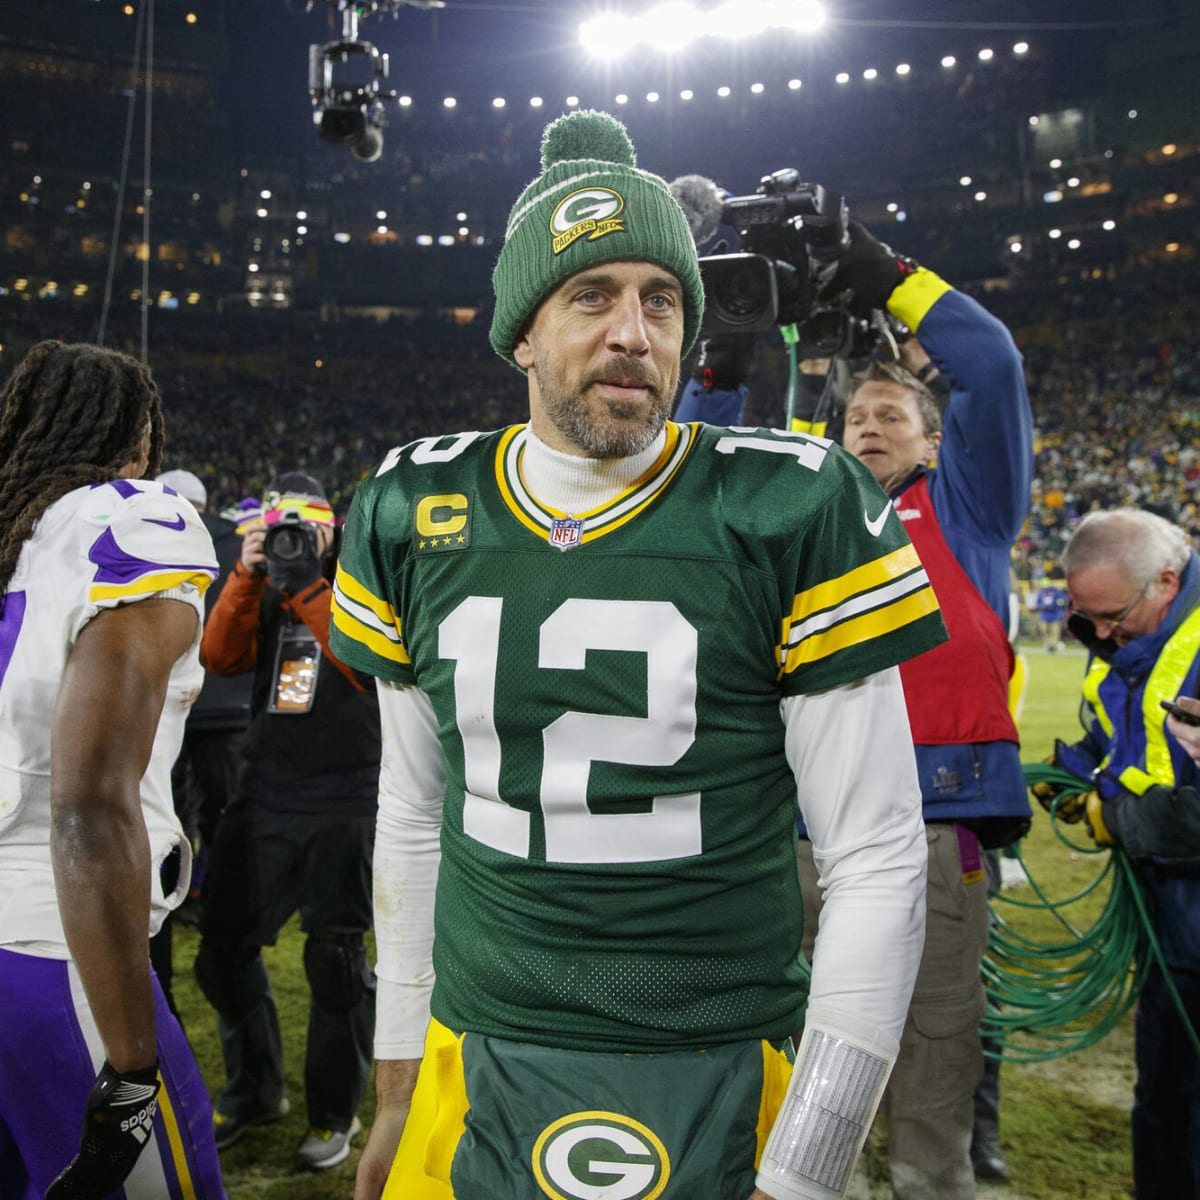 Packers' Aaron Rodgers sounds intrigued by Jets but believes in Zach Wilson  